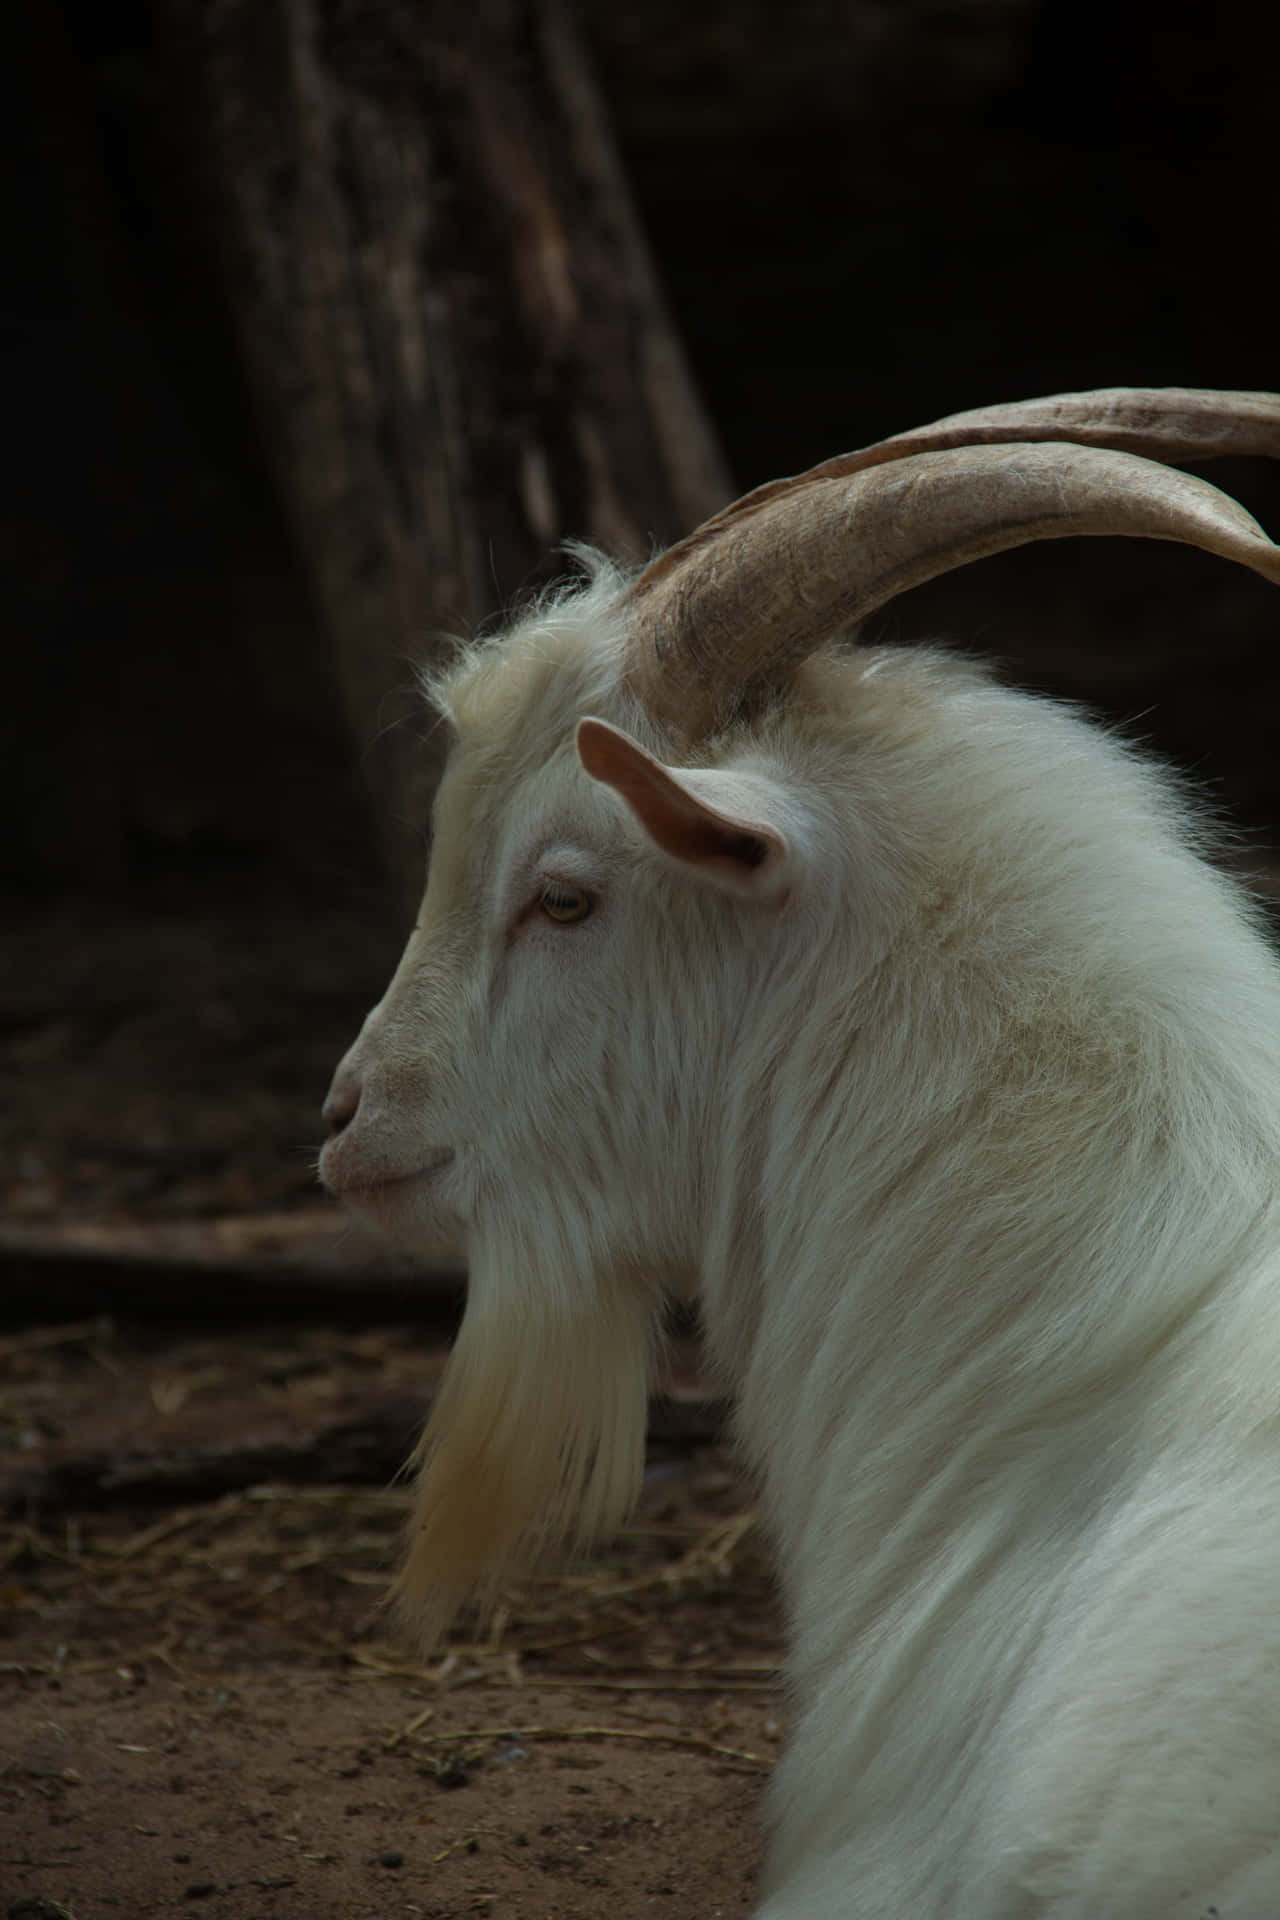 Hike through the mountains with a Goatsy companion